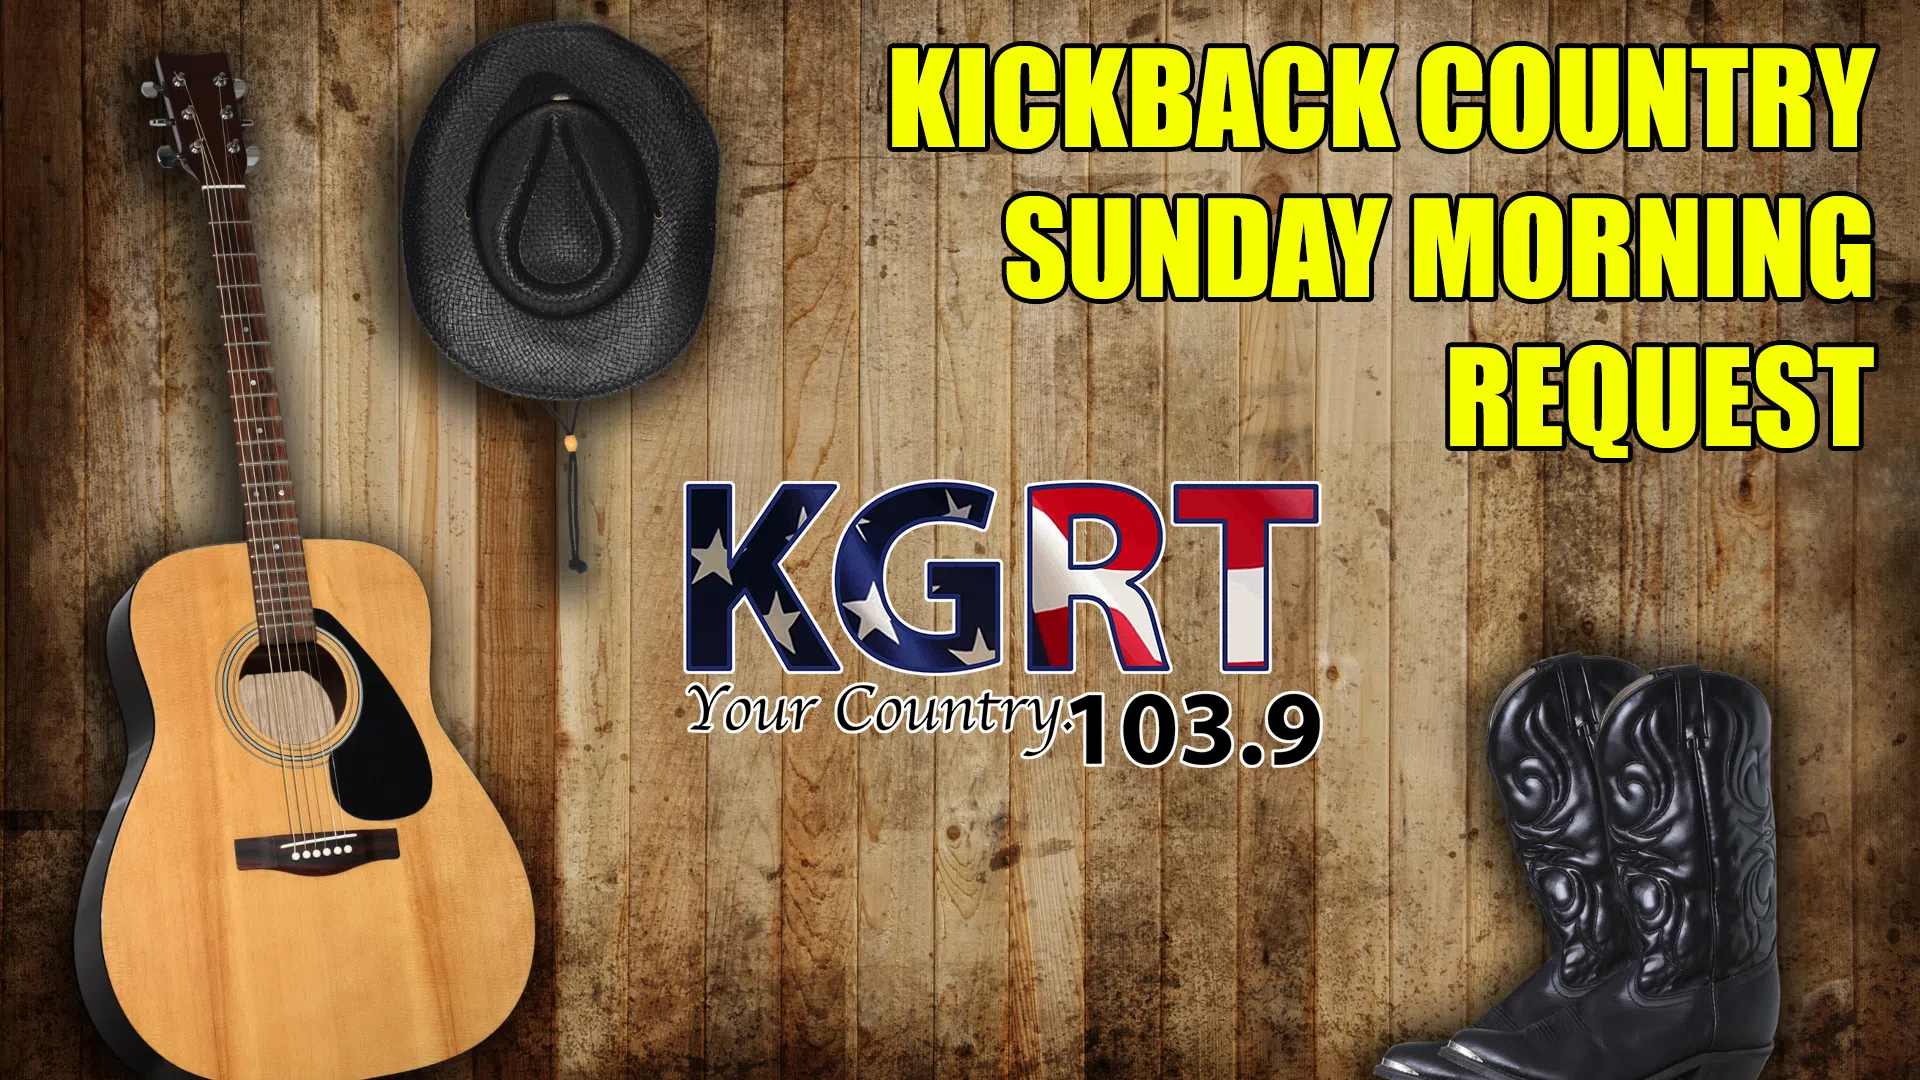 Feature: https://www.kgrt.com/kgrt-kickback-country-sunday-morning-request/